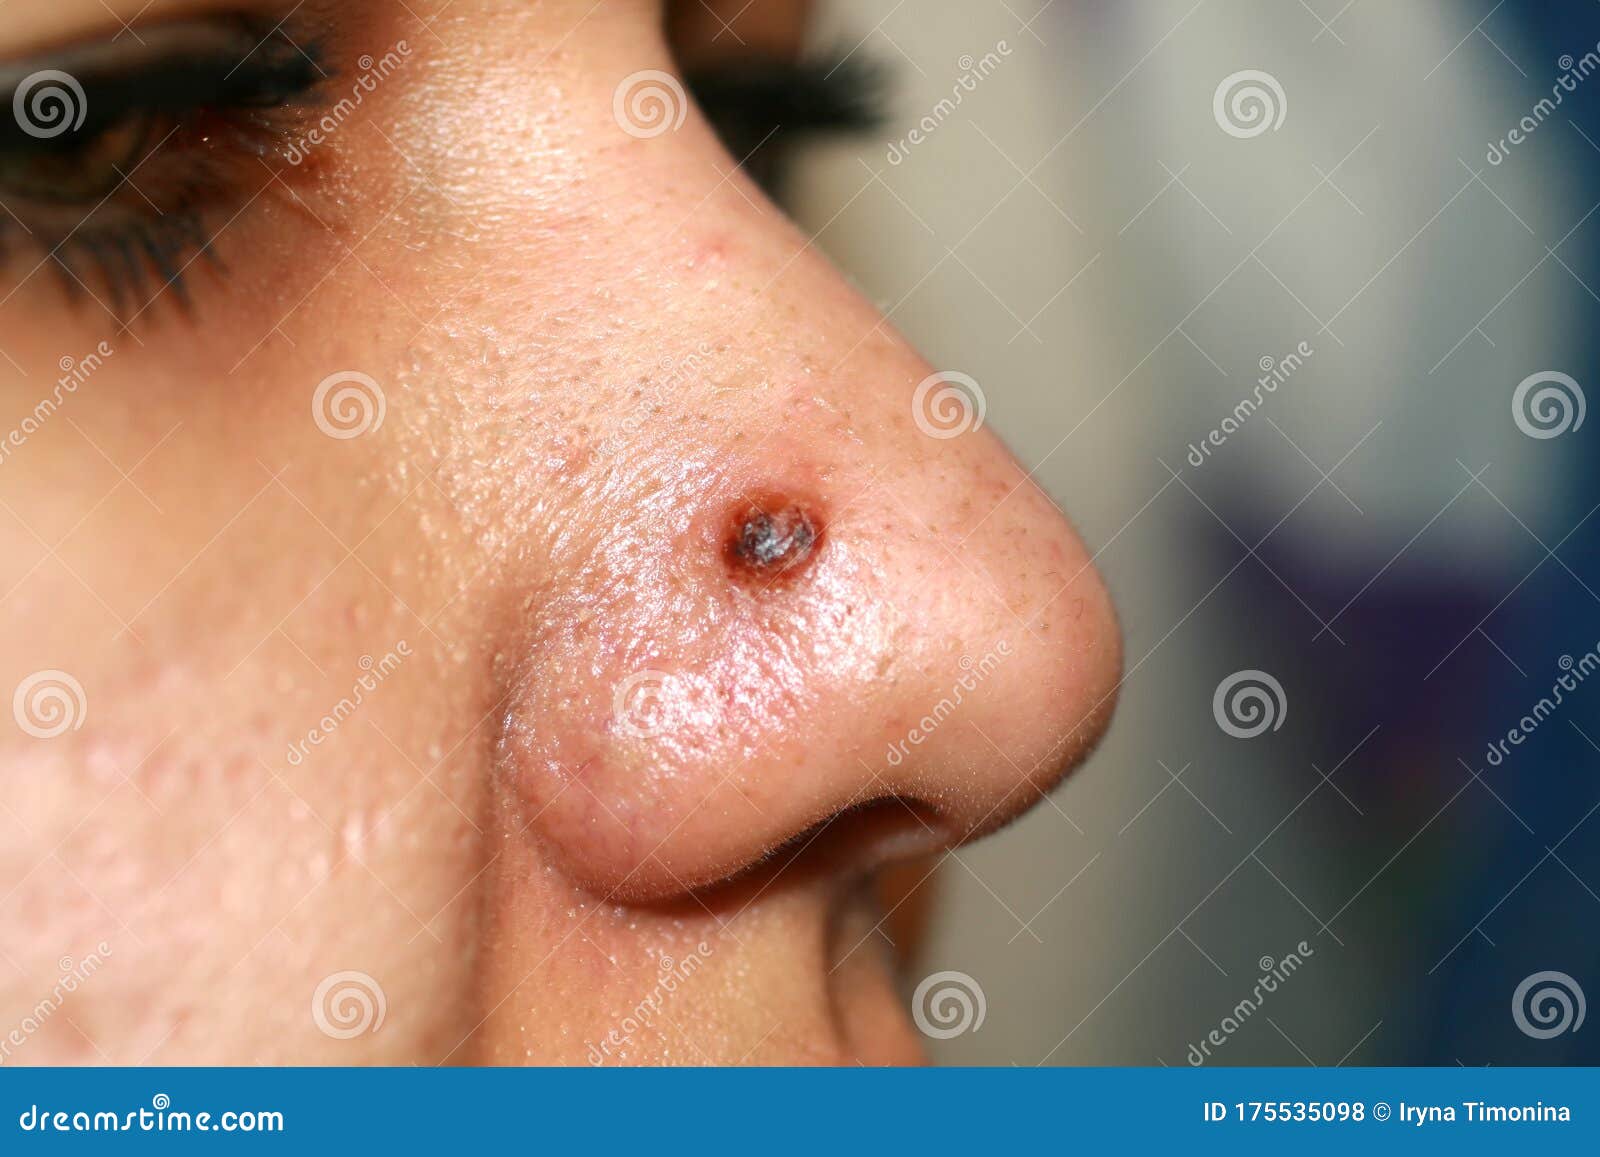 acne cyst nose